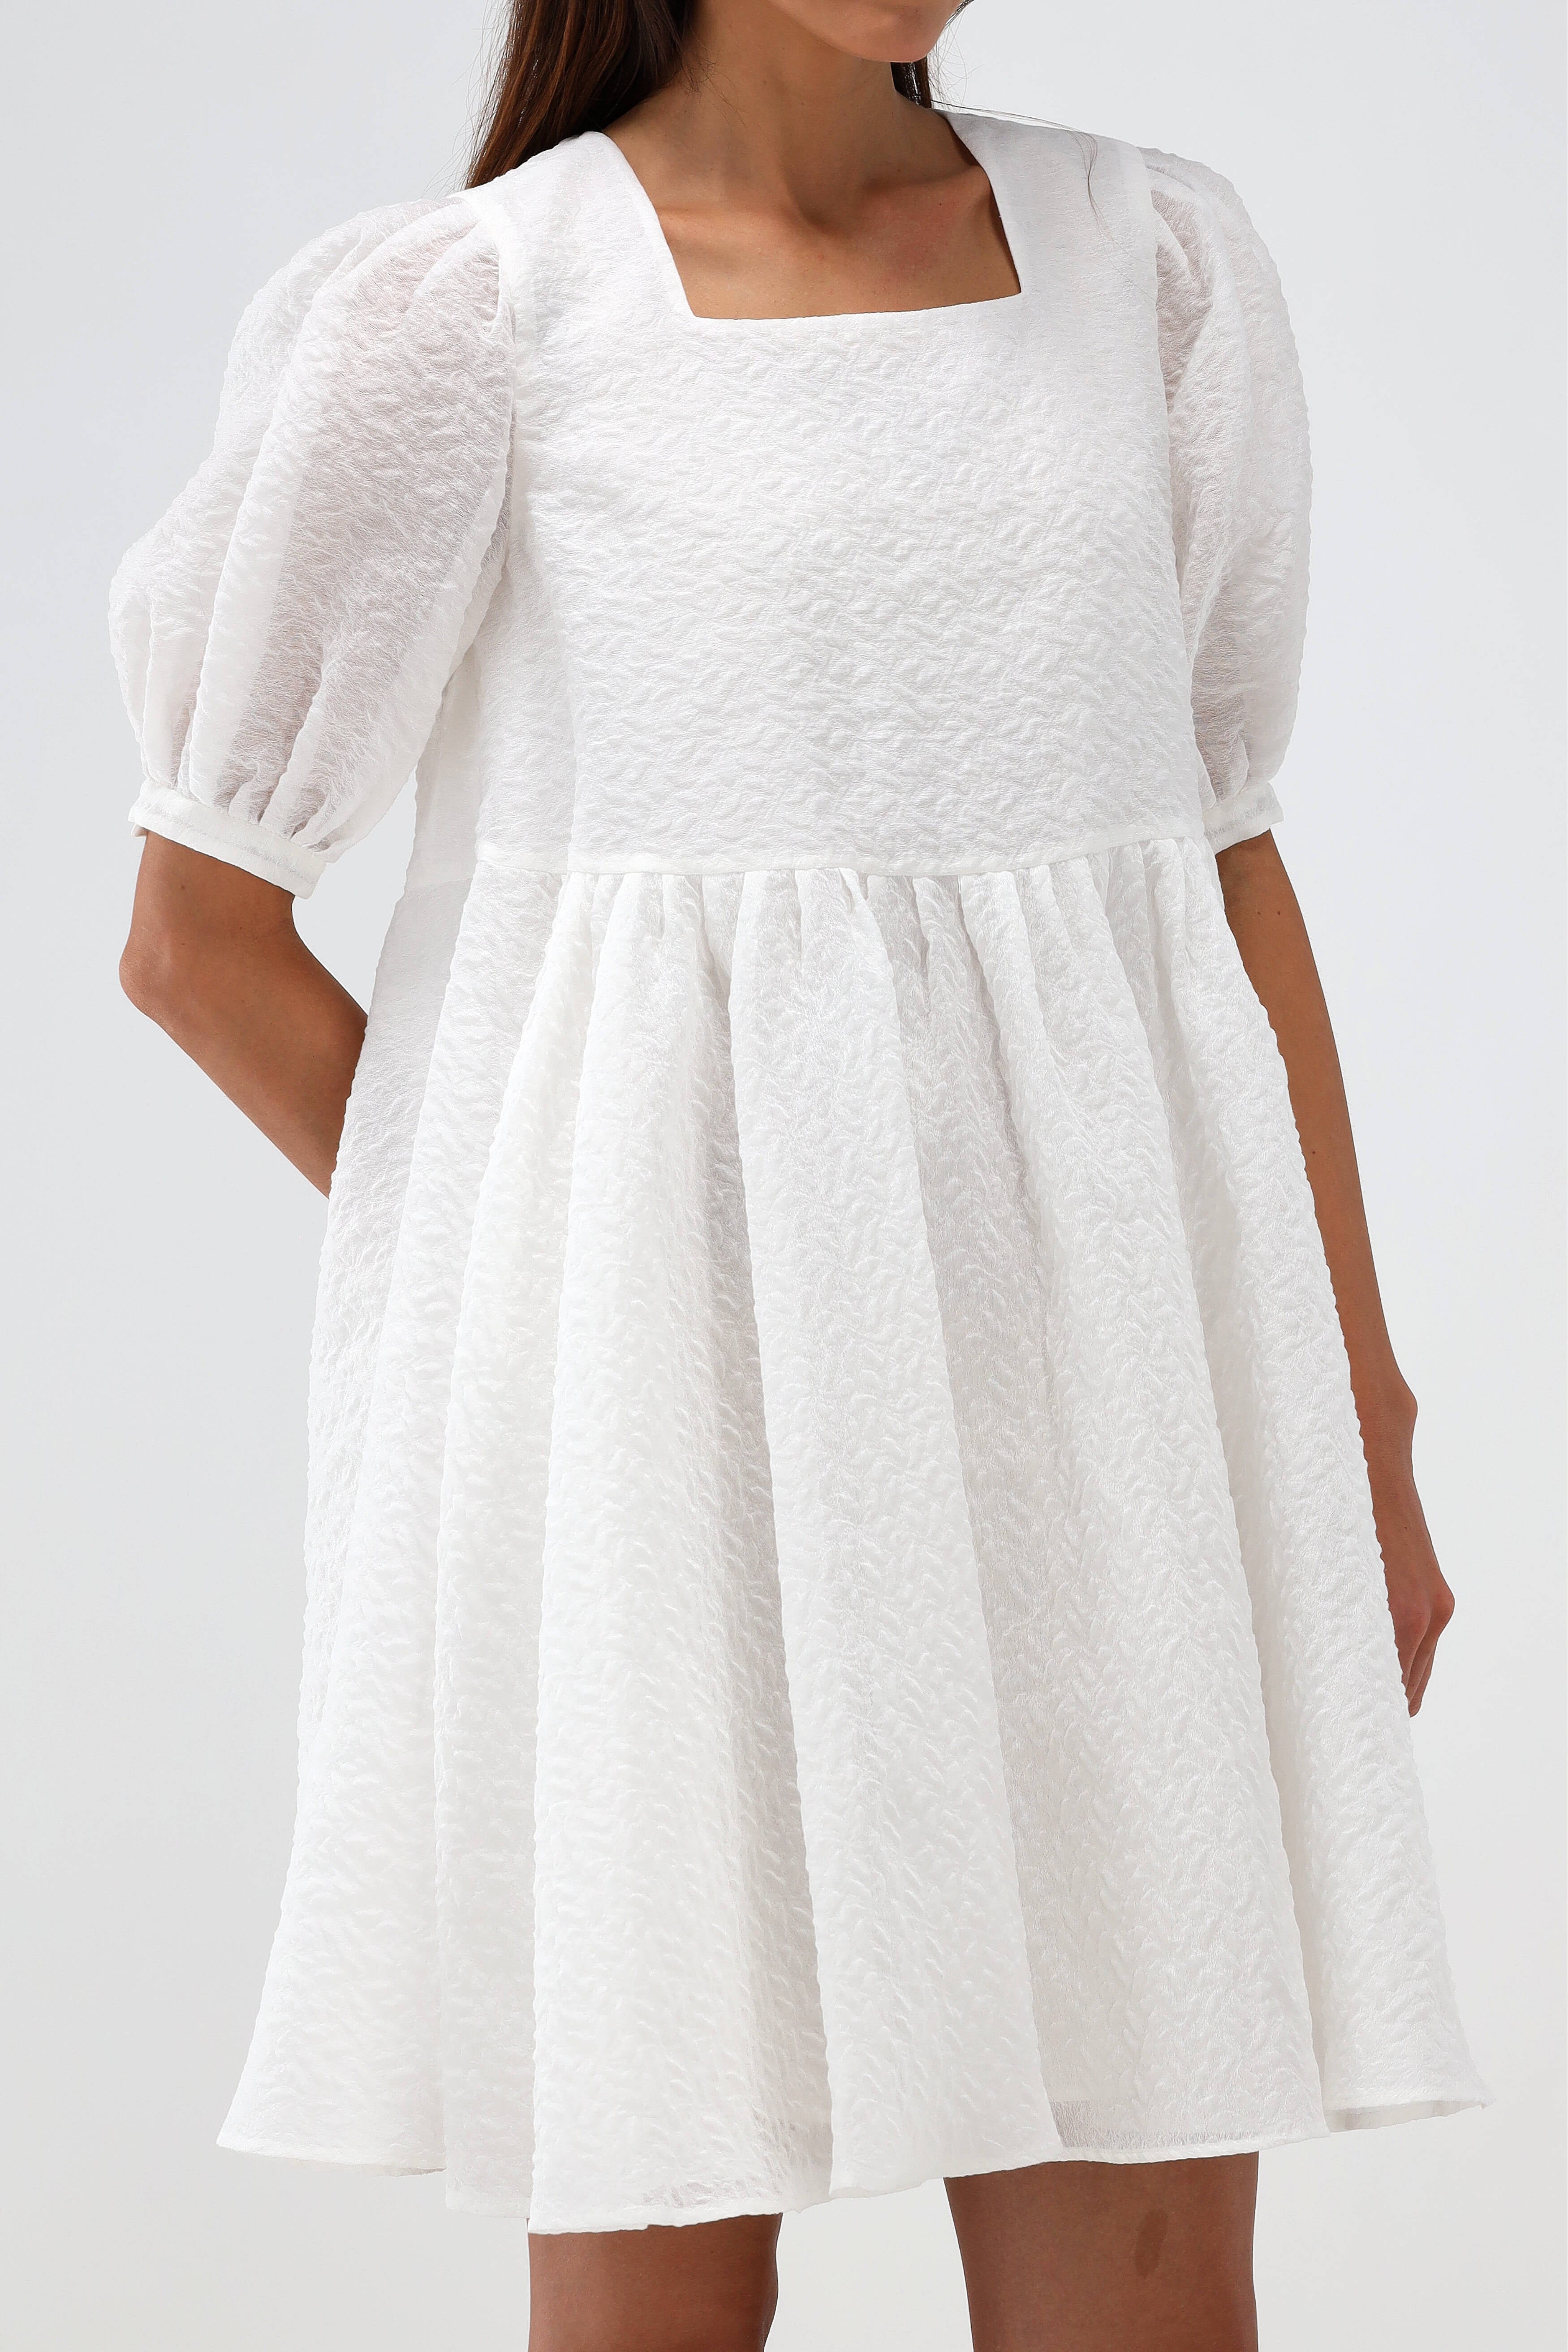 Dress Eemnes Jaquard in white – anitahass.com